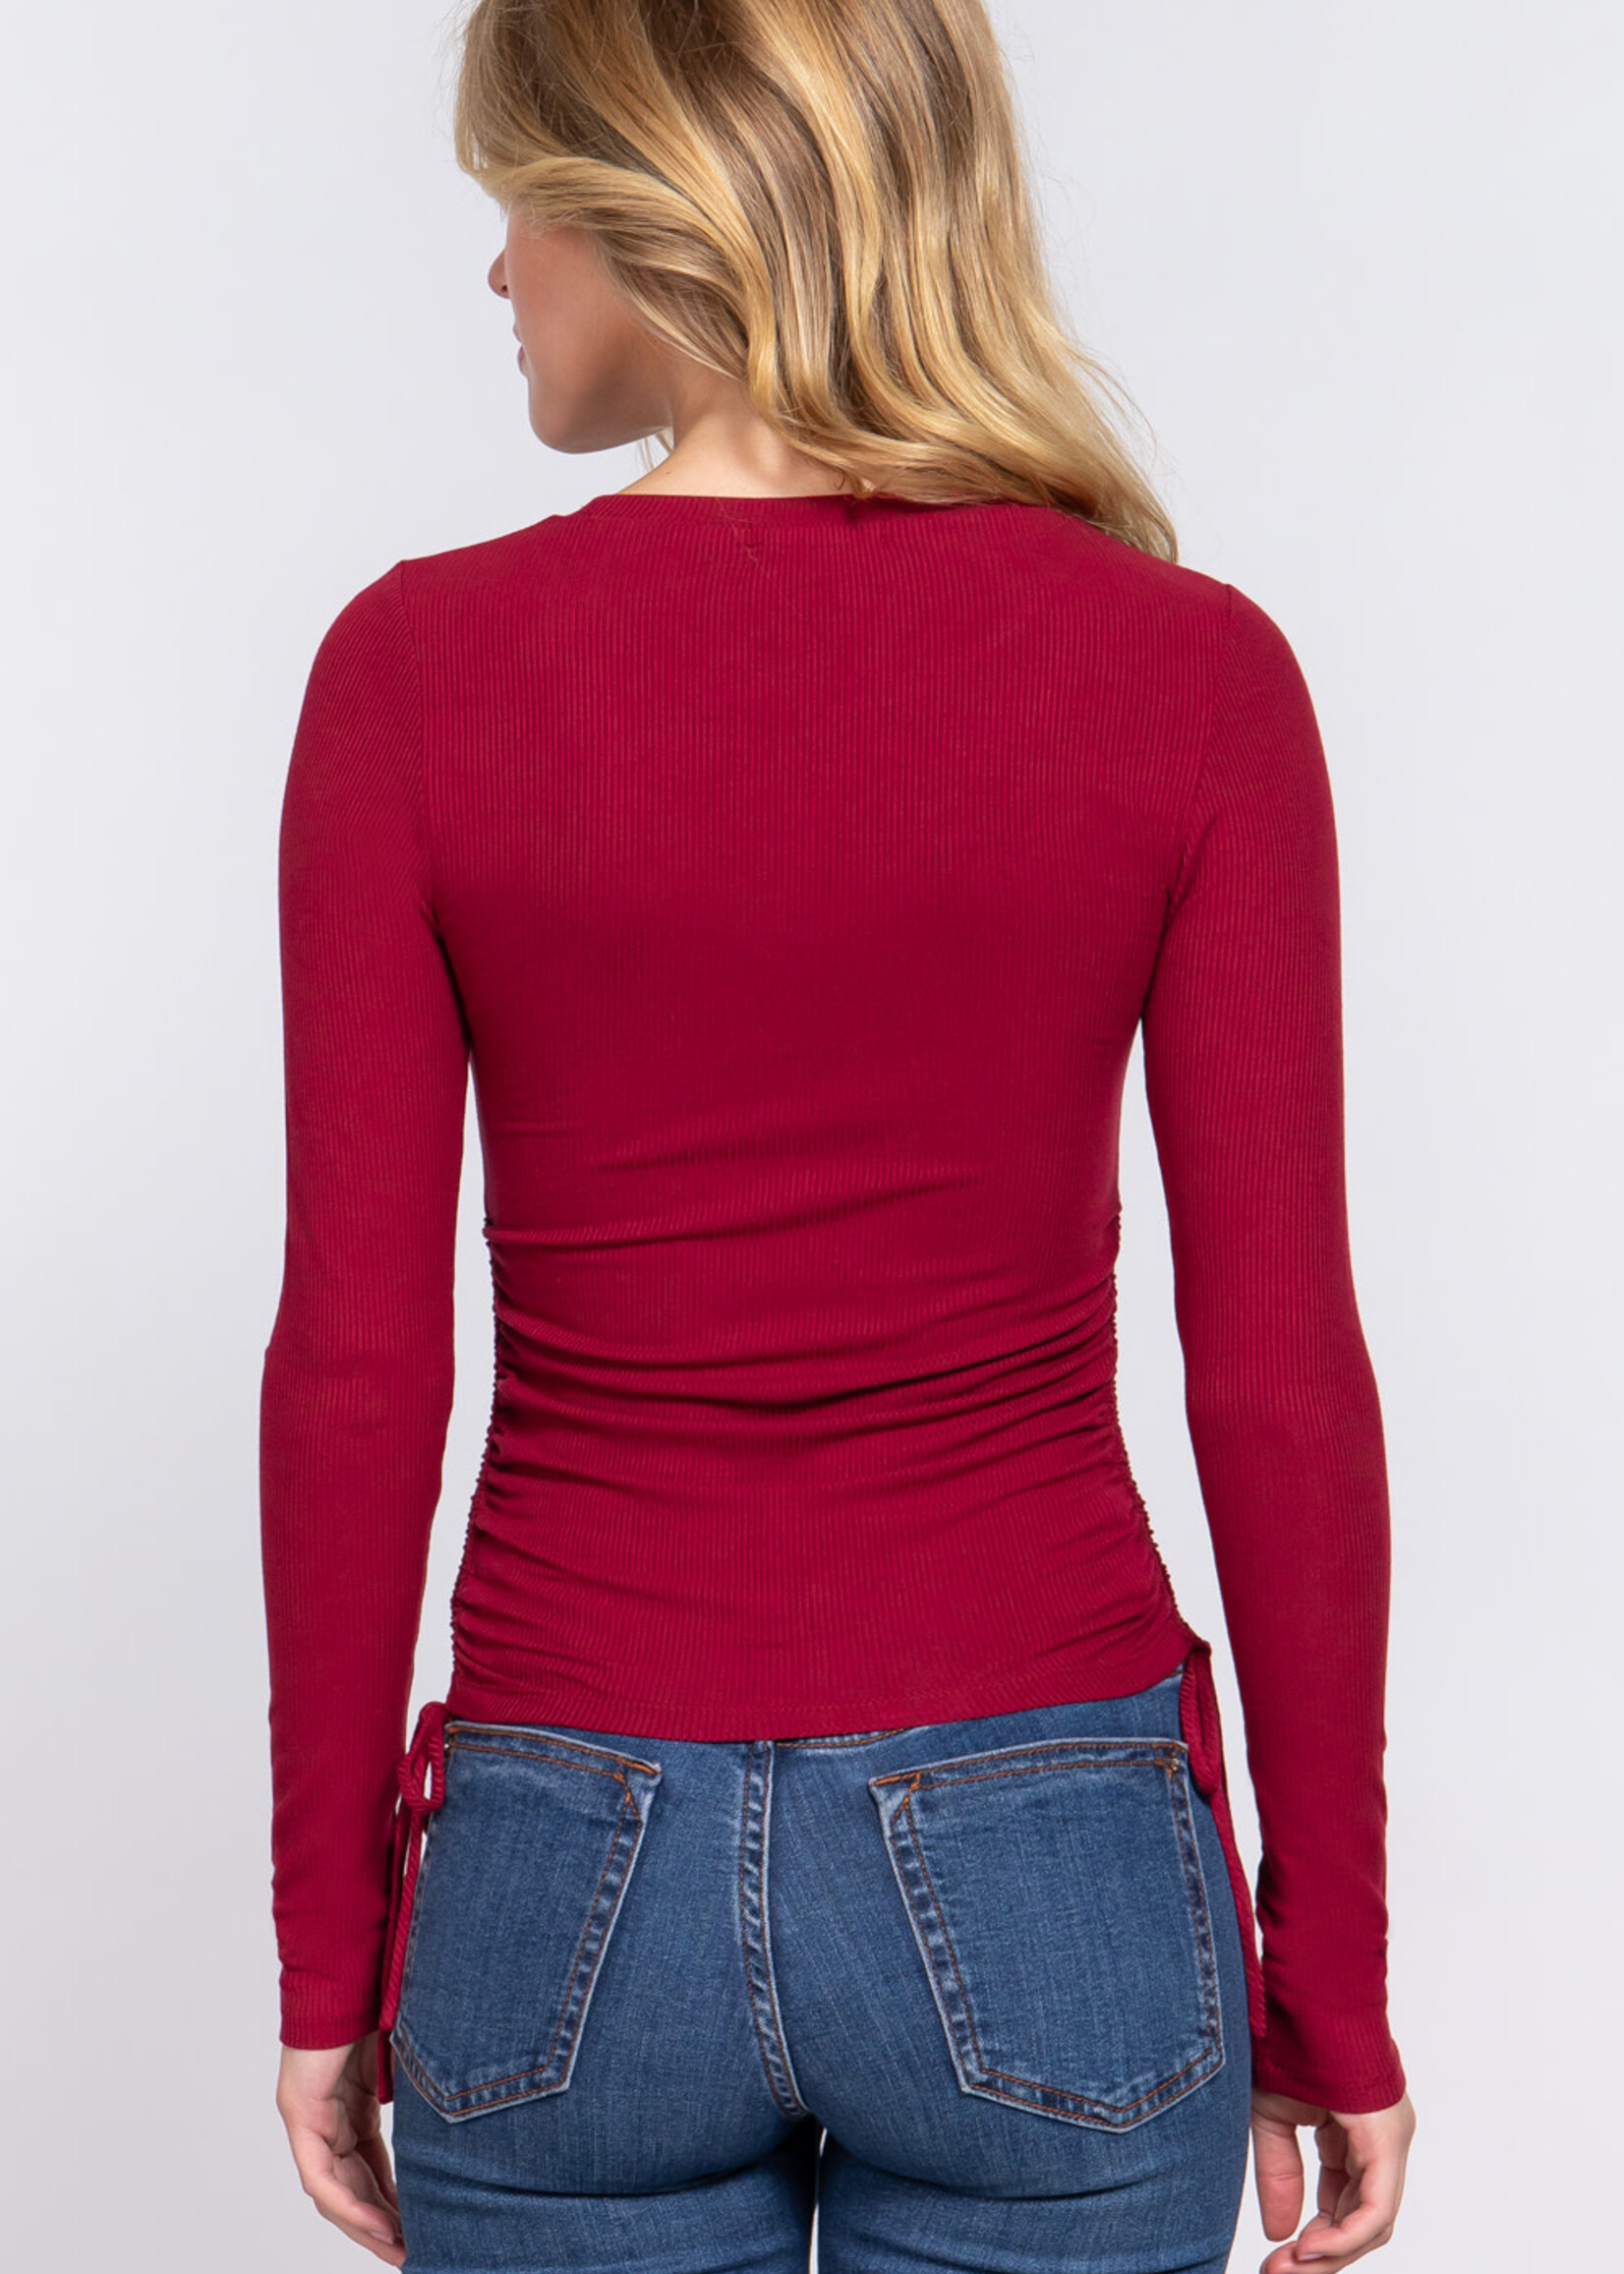 Long Sleeve Ruched Rib Knit Top - T13689 - Oly's Home Fashion